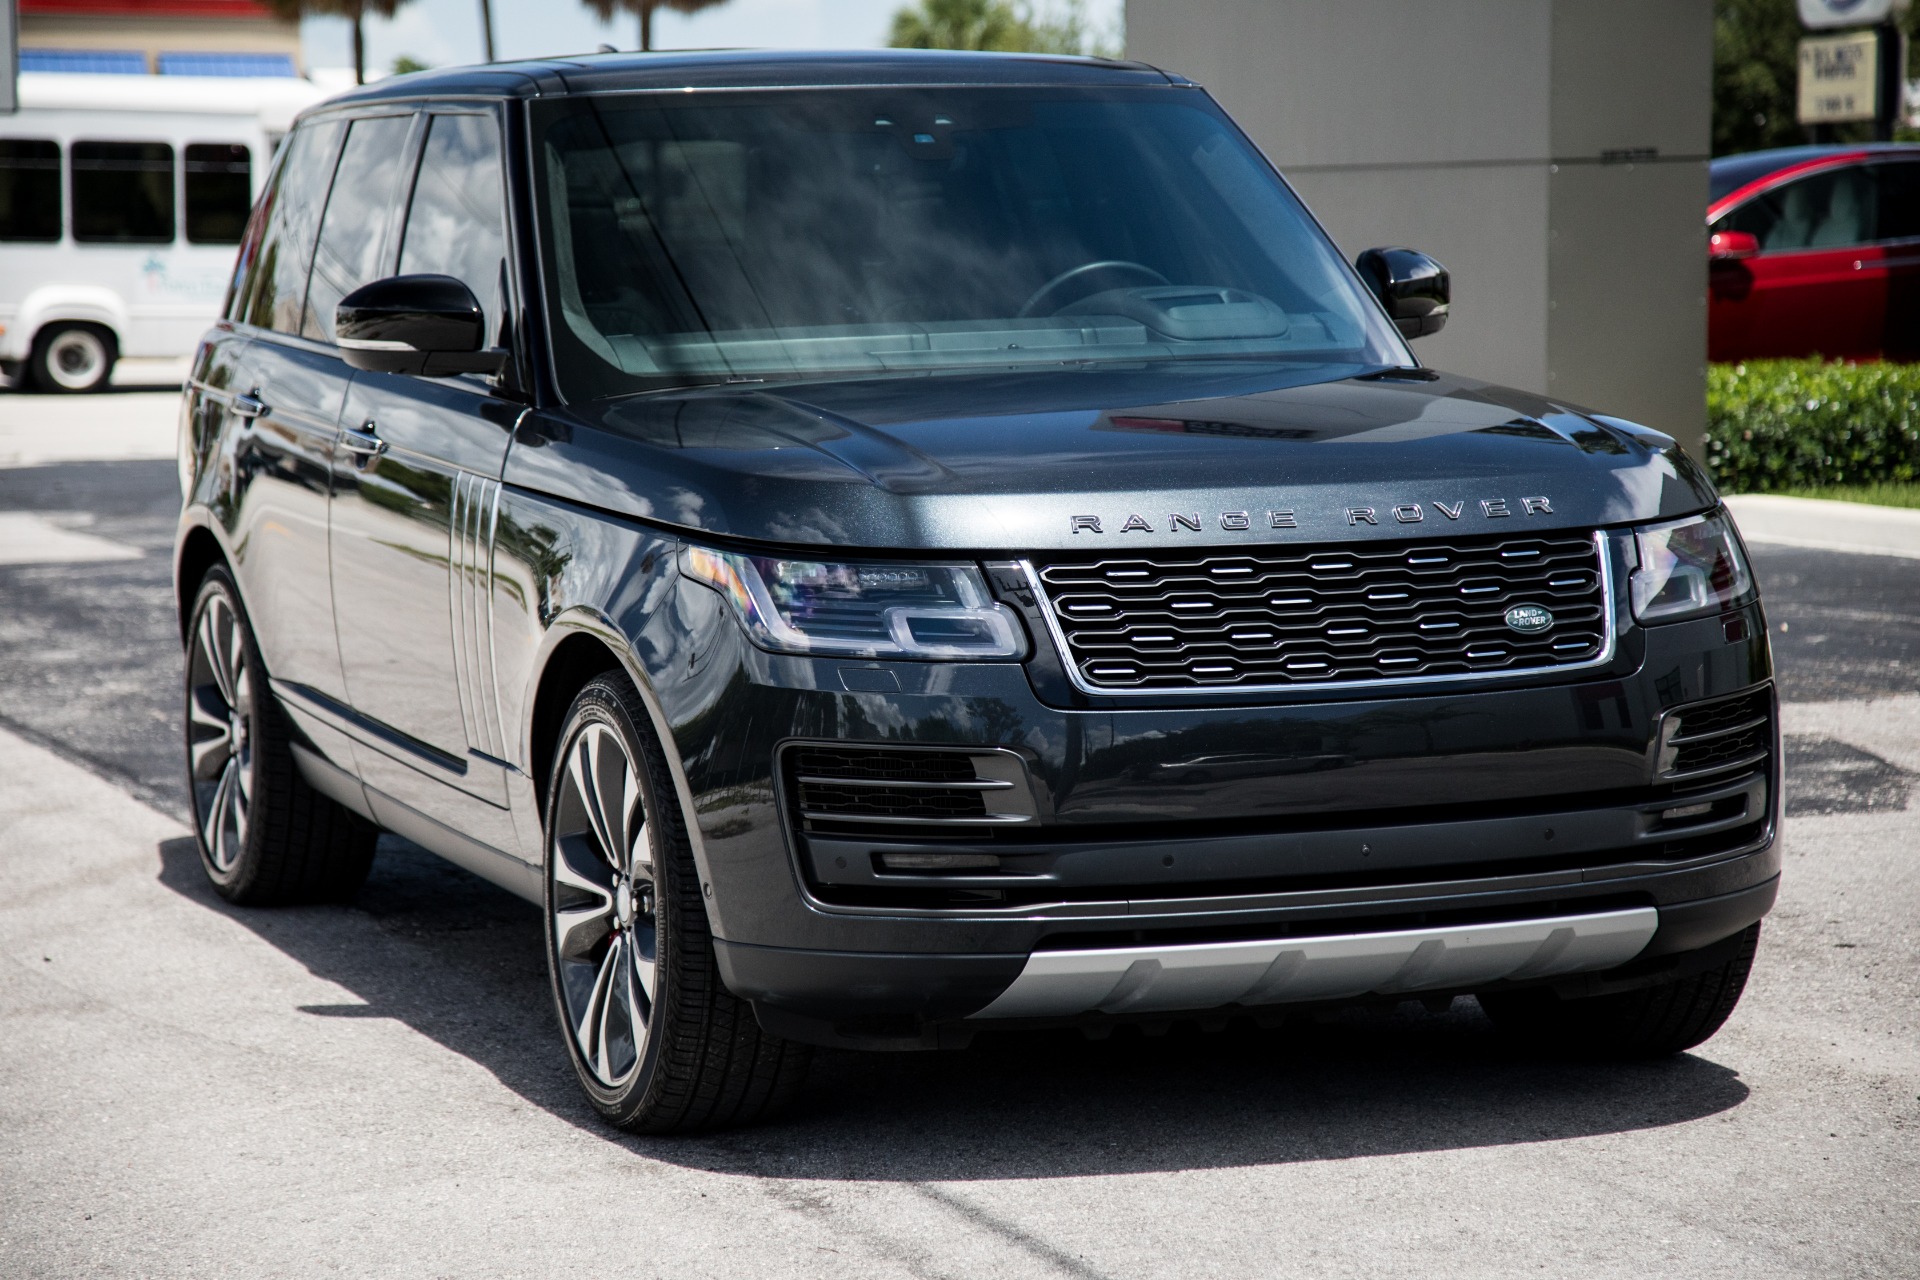 Range Rover 2019 - Photos All Recommendation